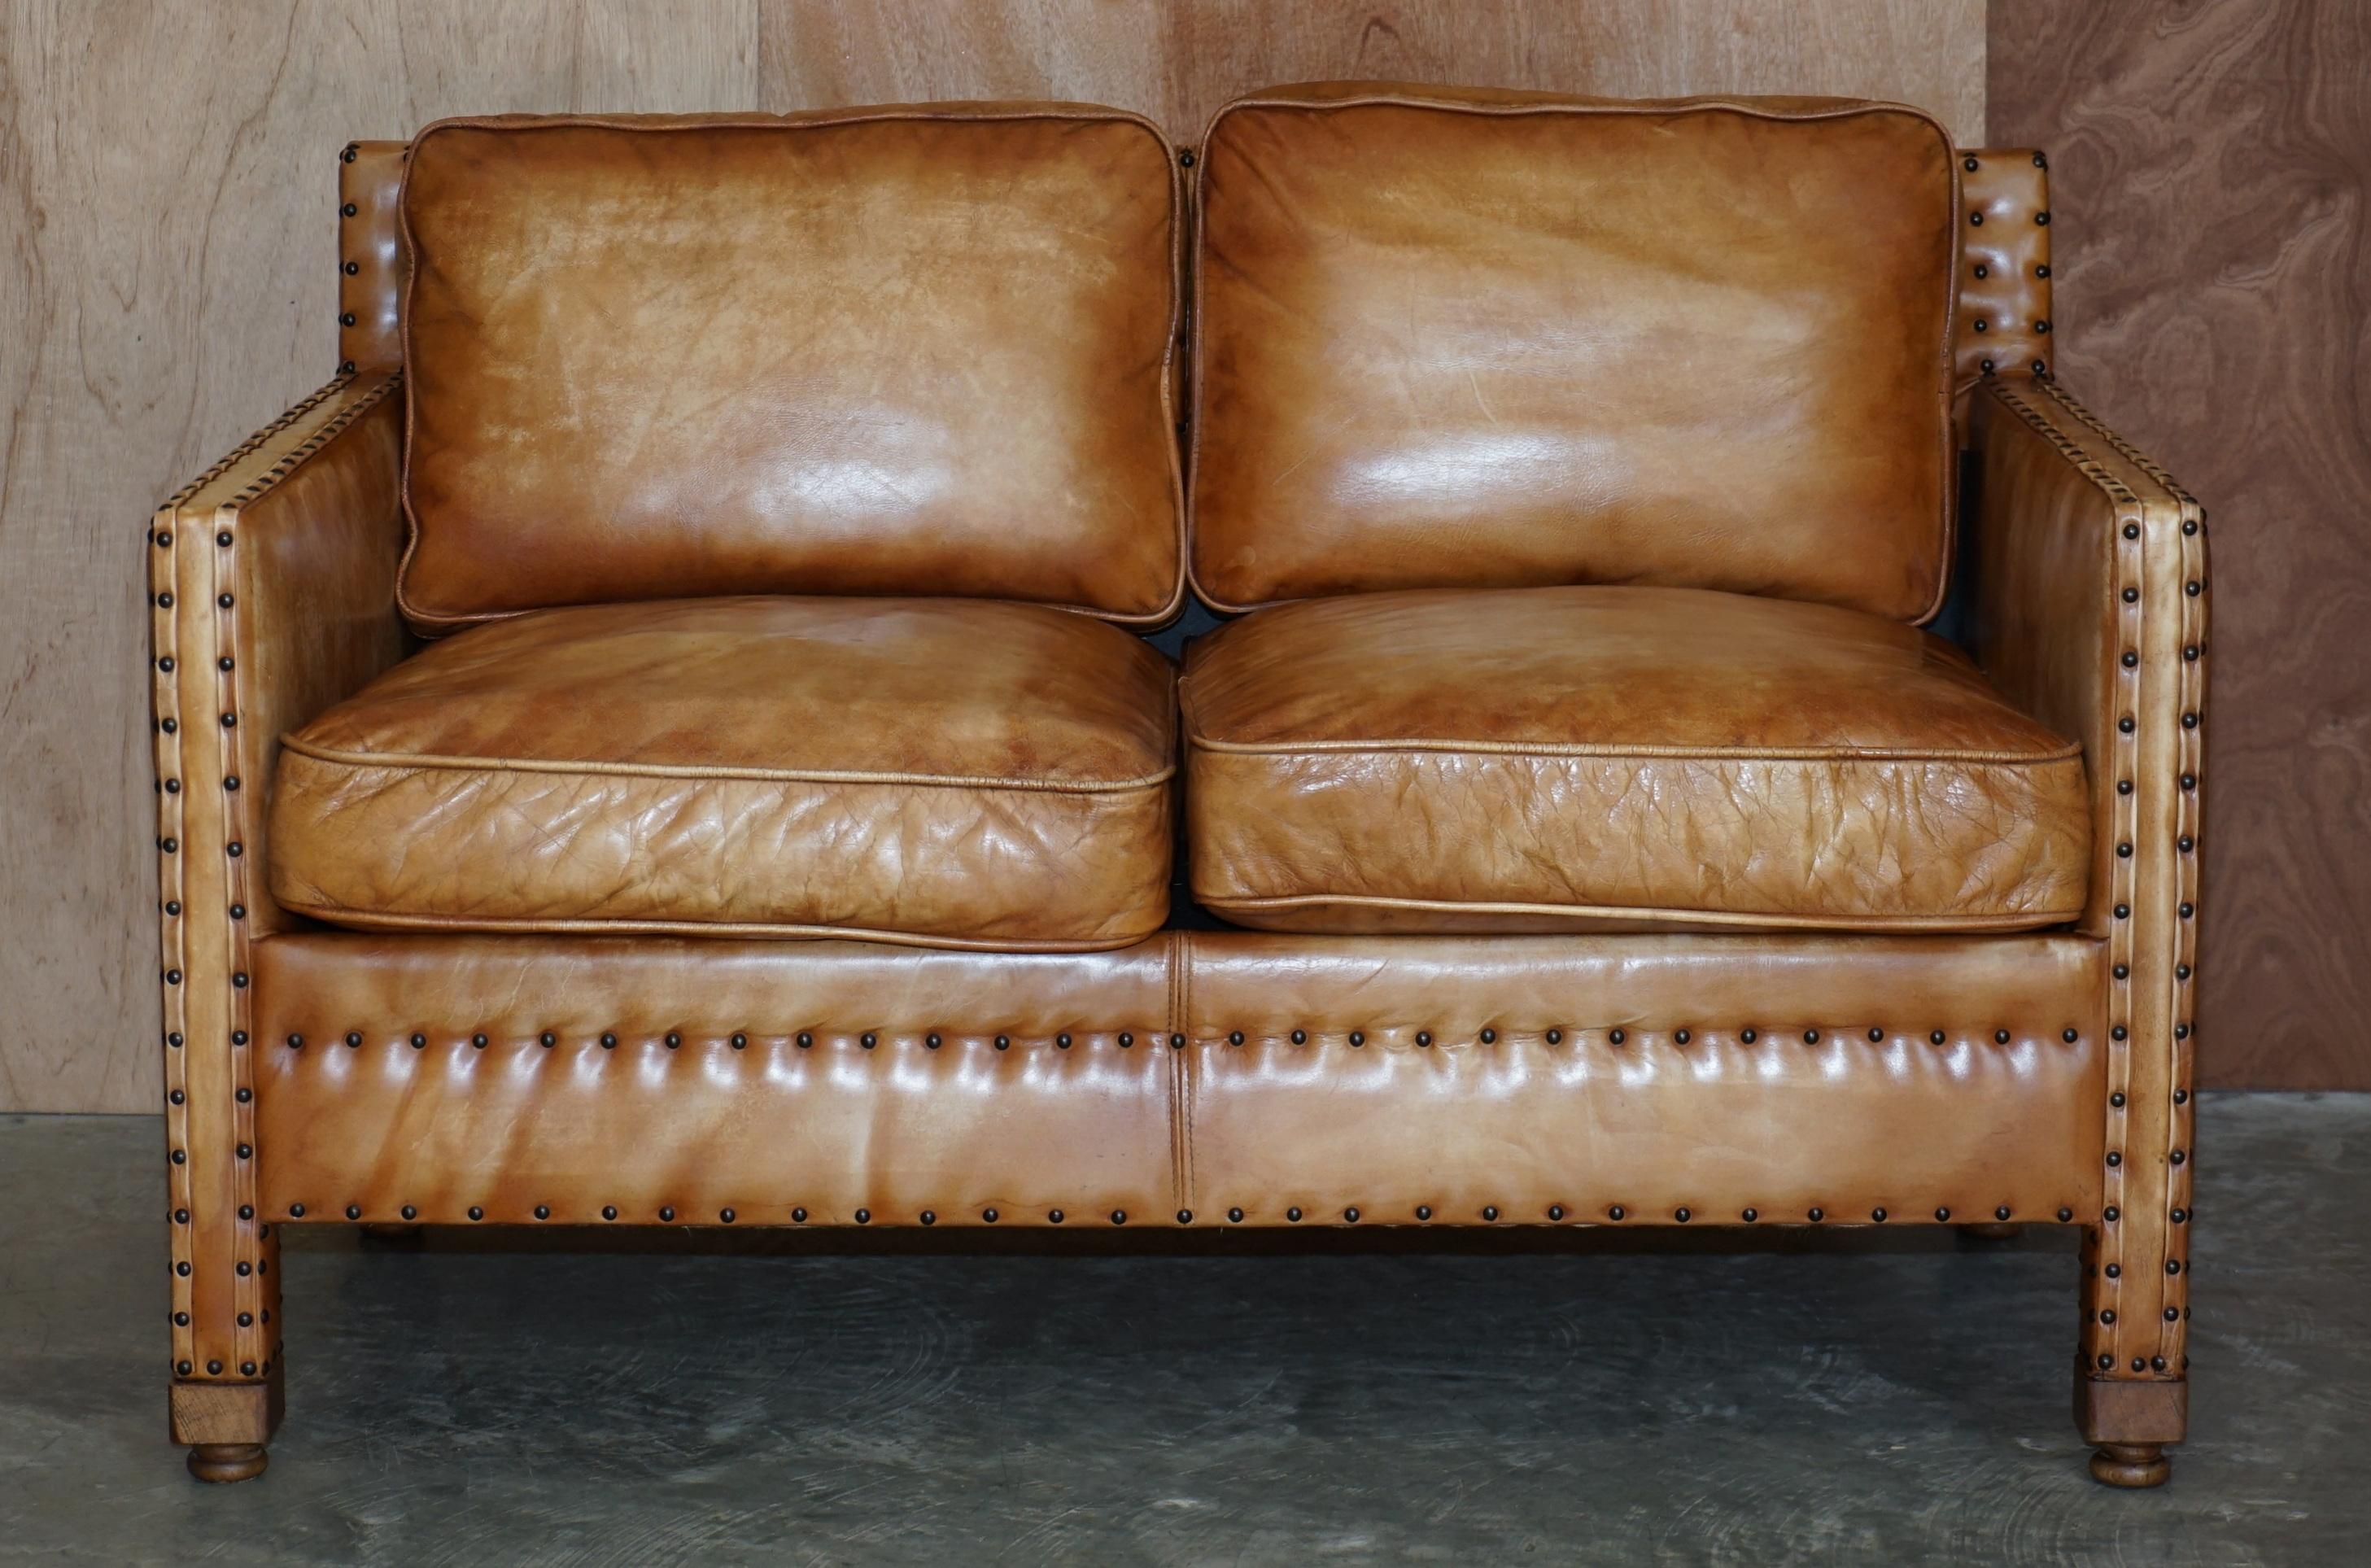 We are delighted to offer this lovely hand dyed tan brown leather two seat sofa with ornate stud work all over

The sofa is well made and stylish, the leather is fully aniline cattle hide so it has a thick natural look, its then hand dyed and